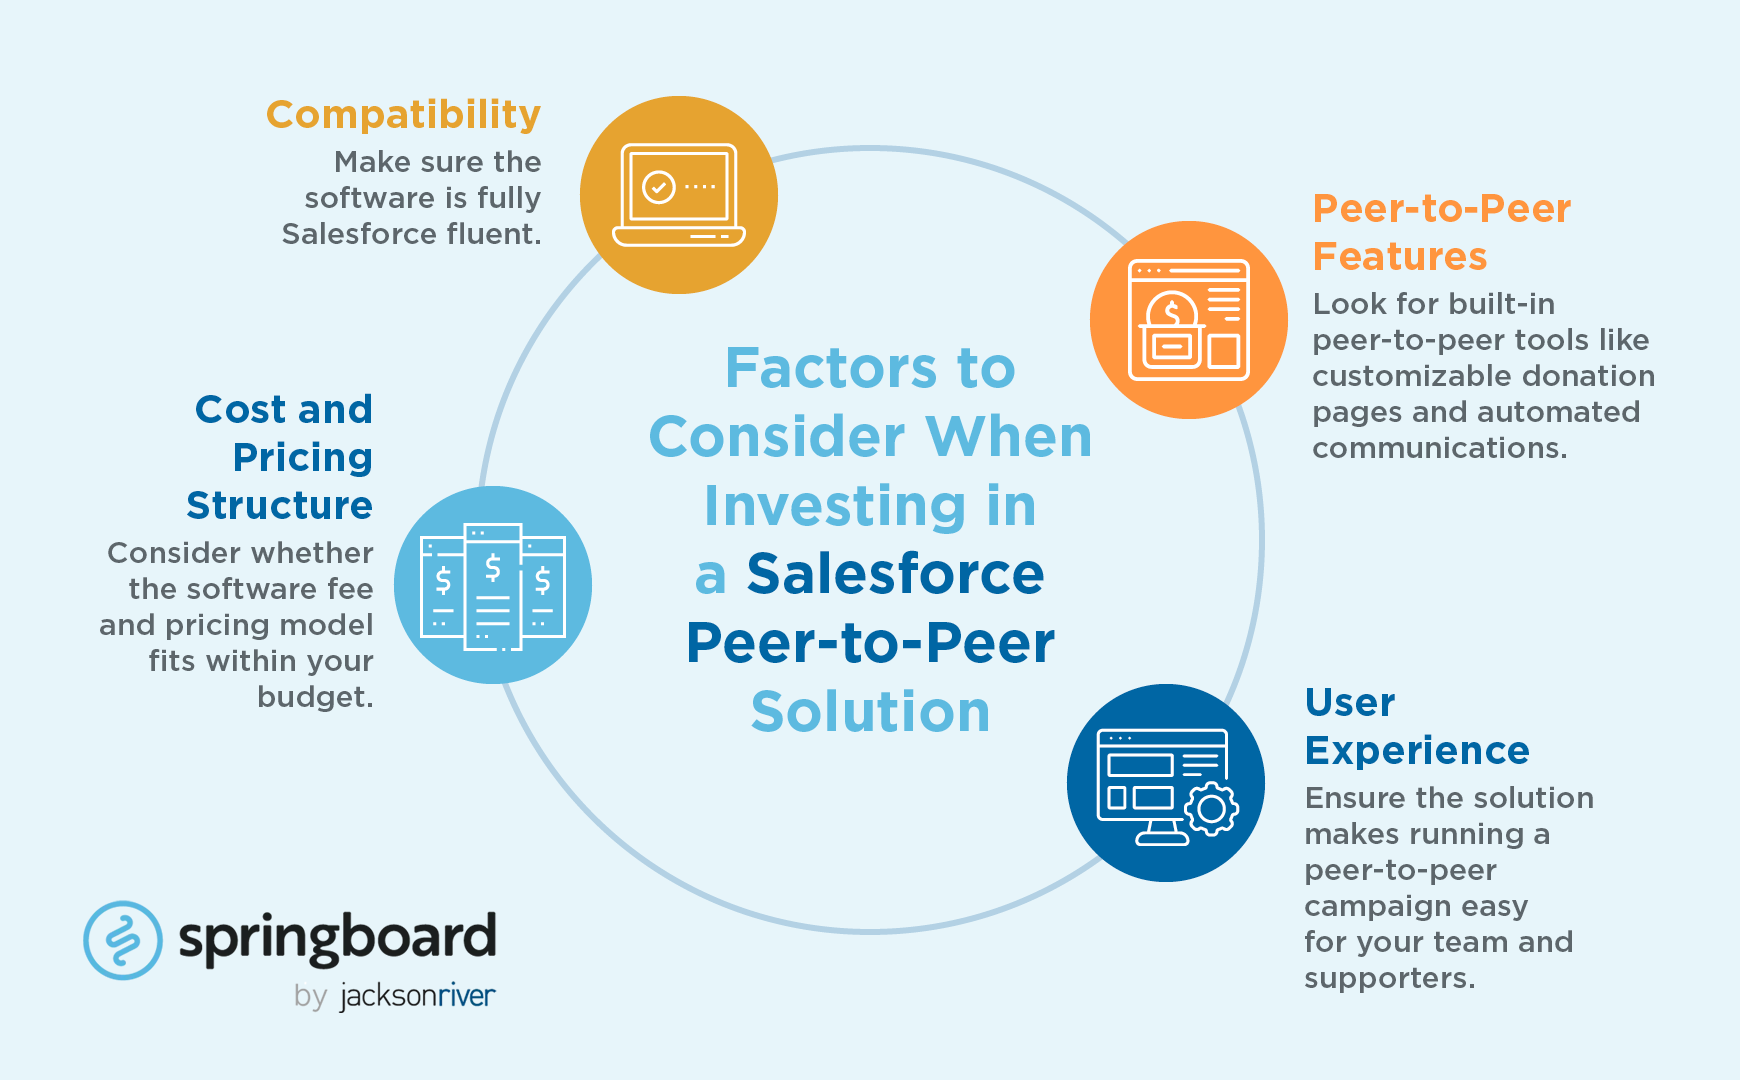 Consider these factors when investing in a peer-to-peer fundraising Salesforce solution, repeated below.